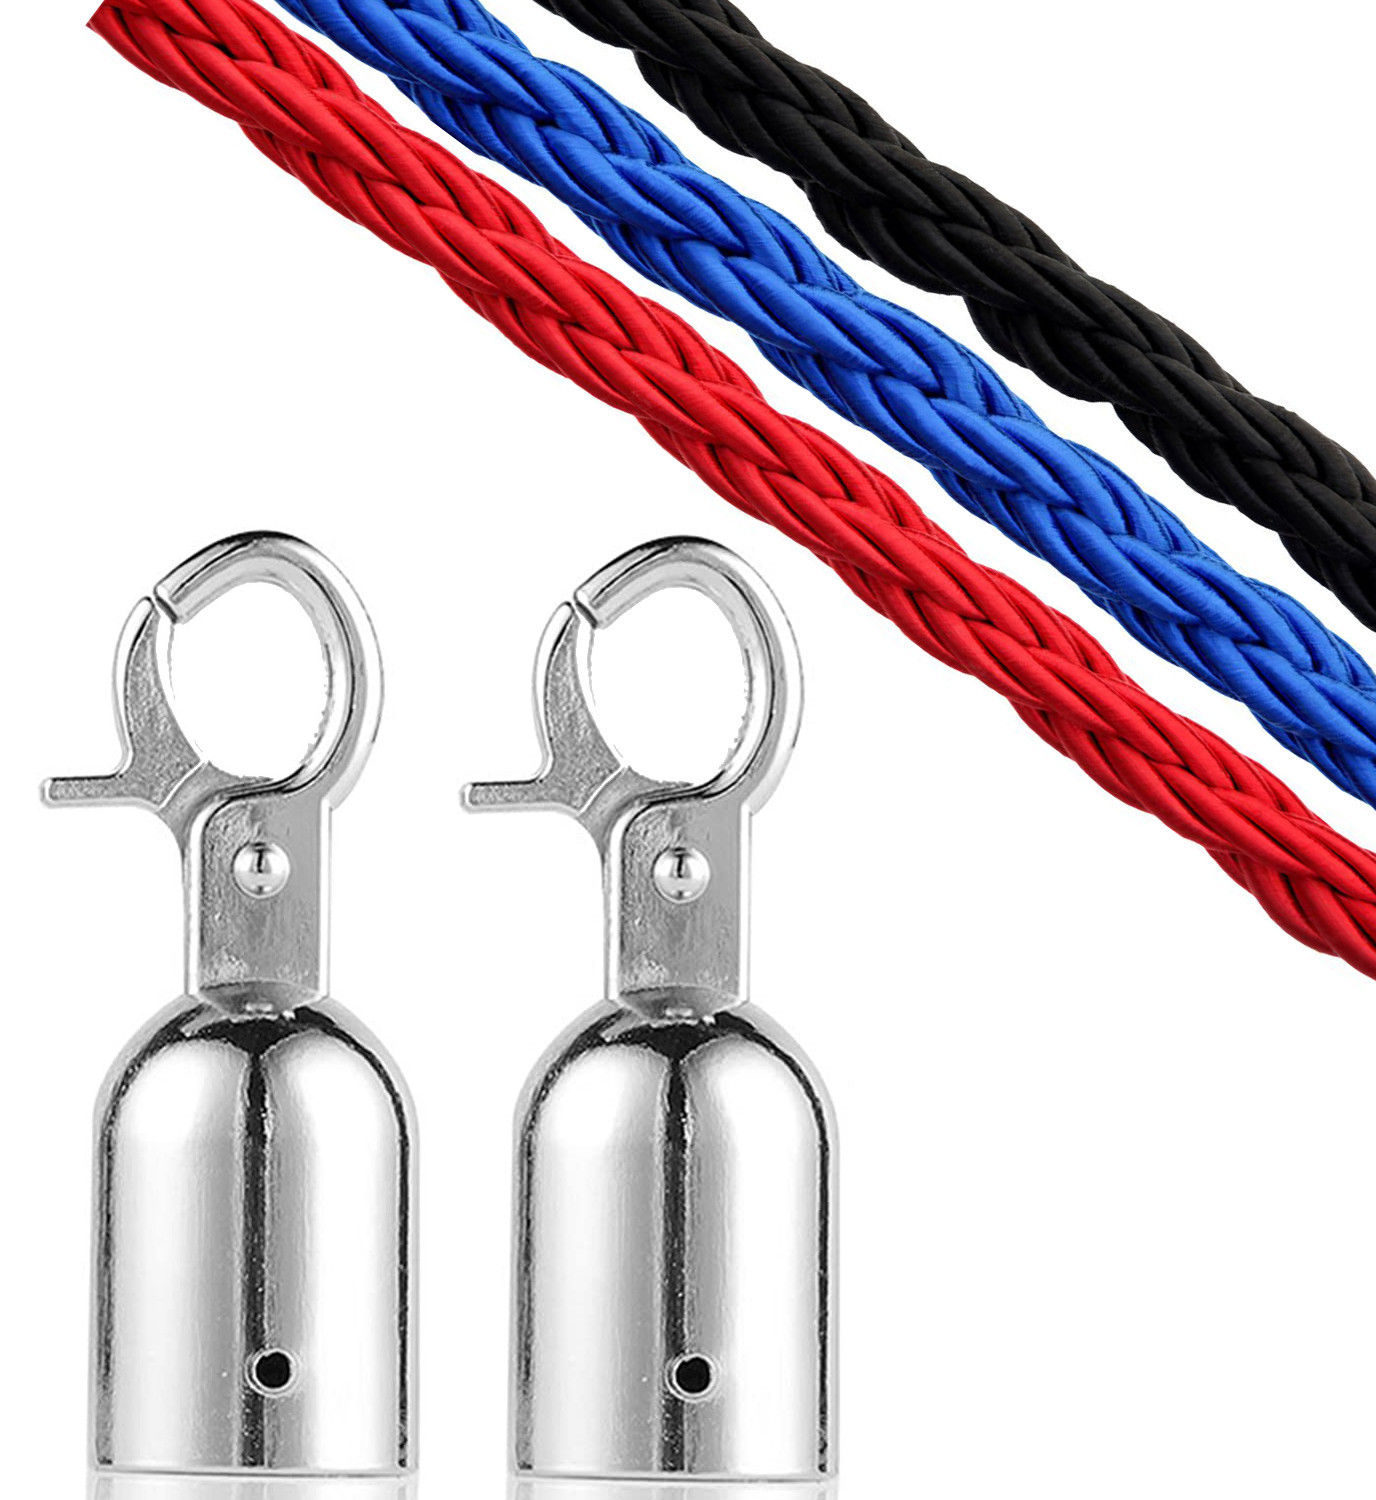 1.5m twisted nylon barrier rope - VIP crowd control